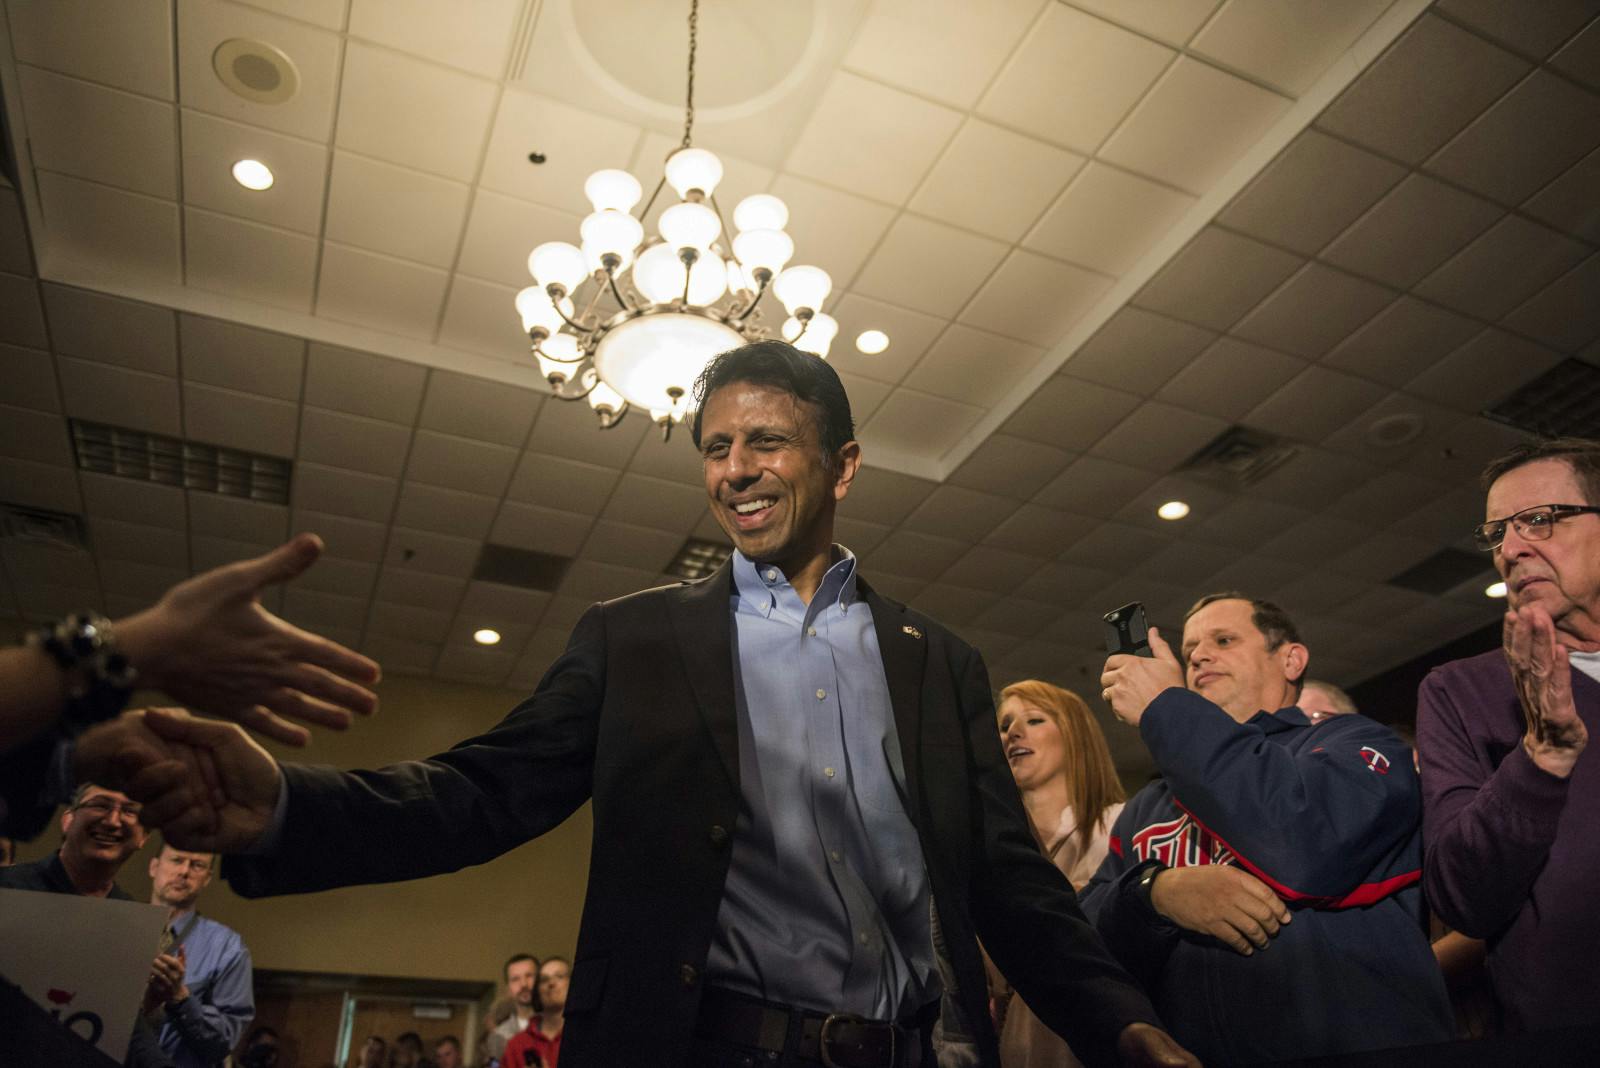 Where is Bobby Jindal?